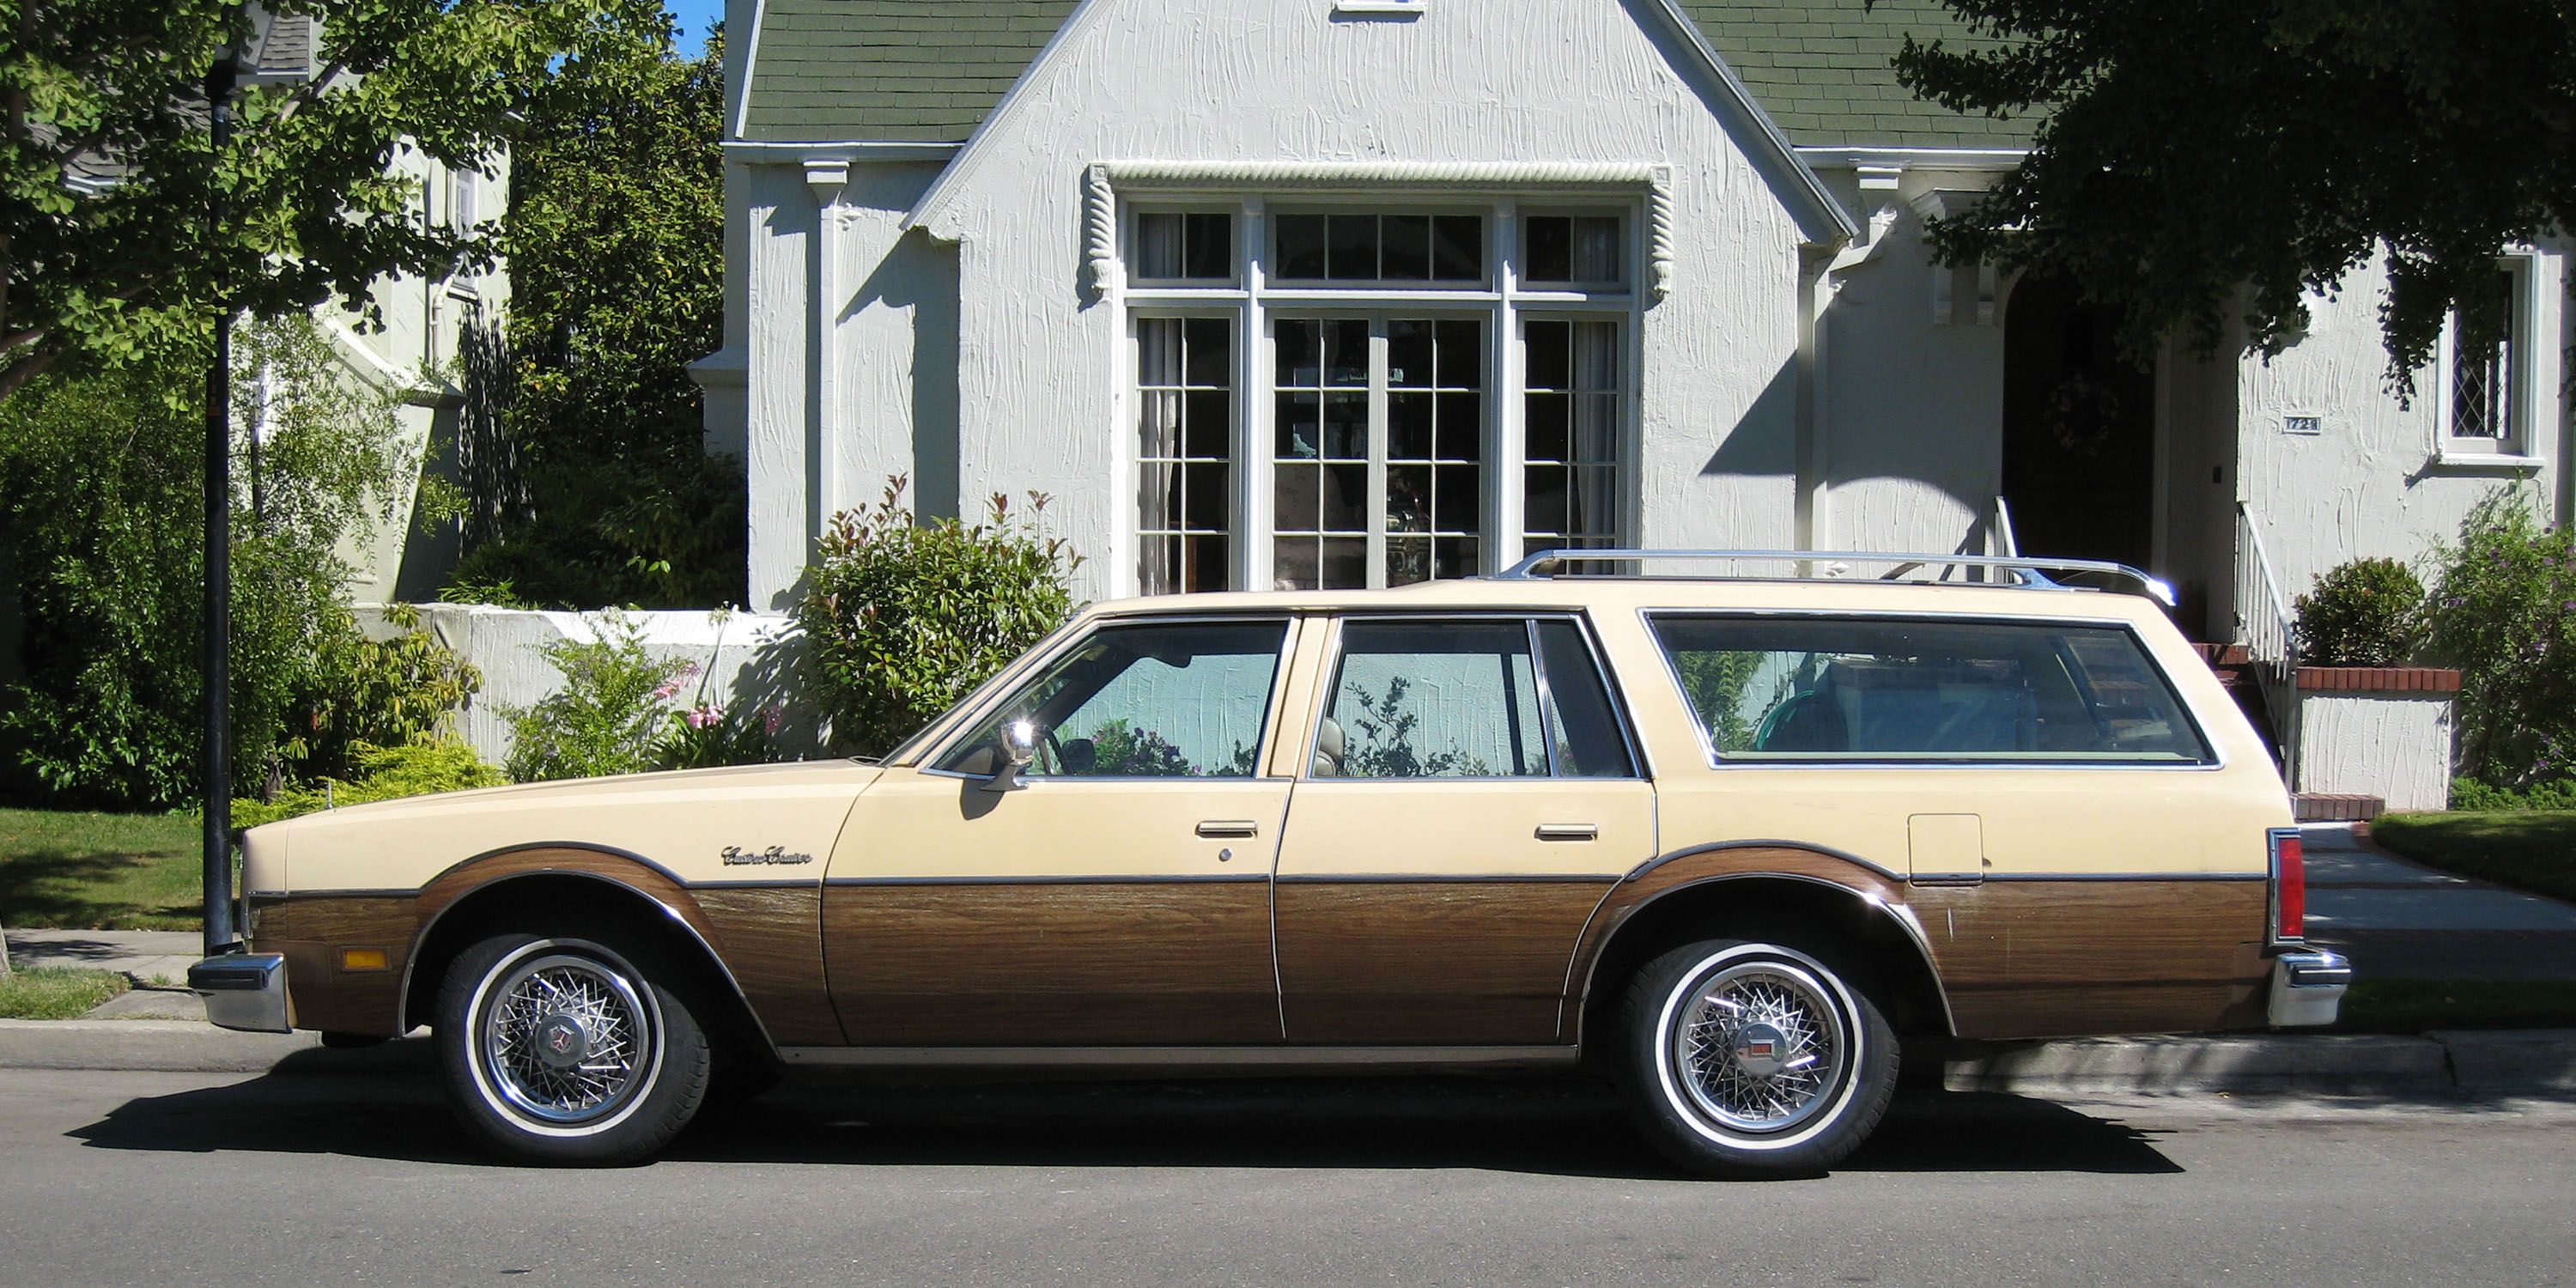 What Year Was Peak Wagon in America?